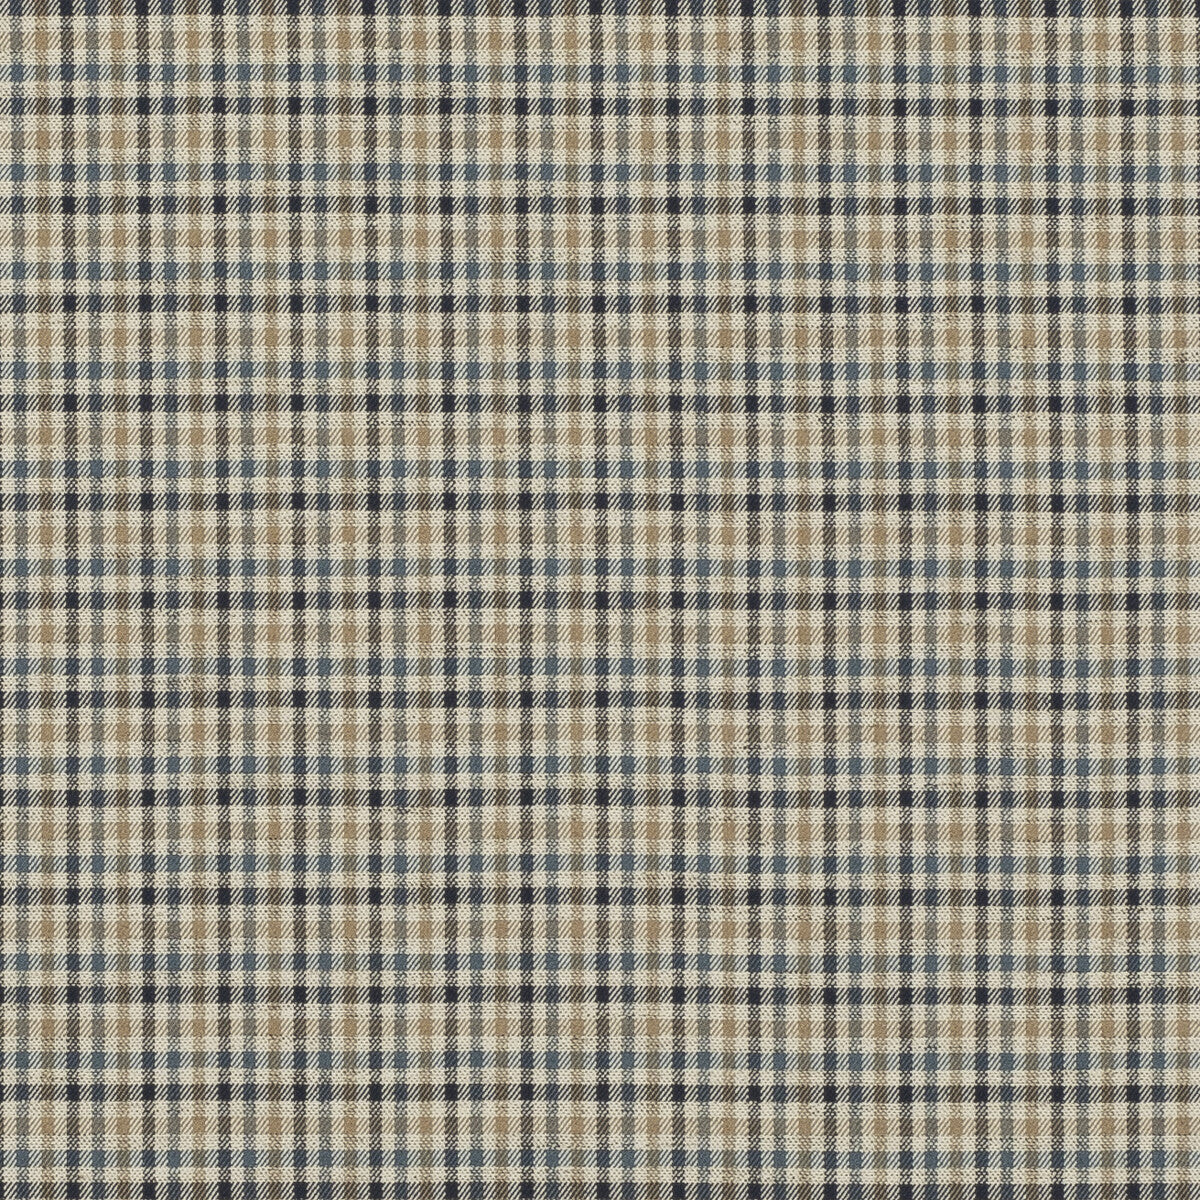 Babington Check fabric in indigo color - pattern FD810.H10.0 - by Mulberry in the Icons Fabrics collection